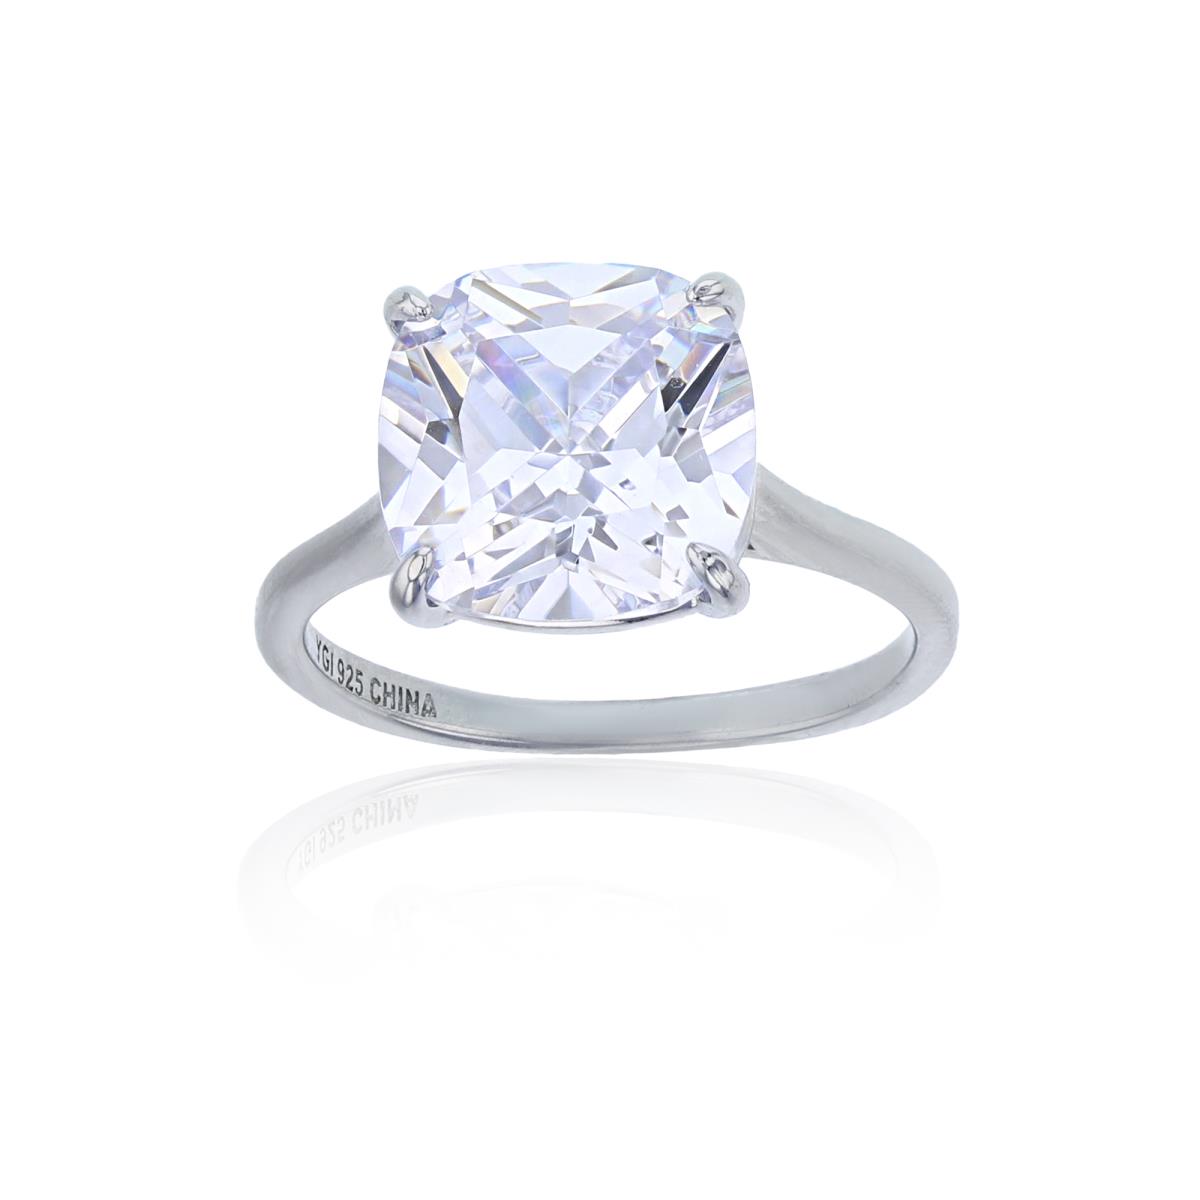 Sterling Silver Rhodium 10mm Cushion Cut Solitaire Ring